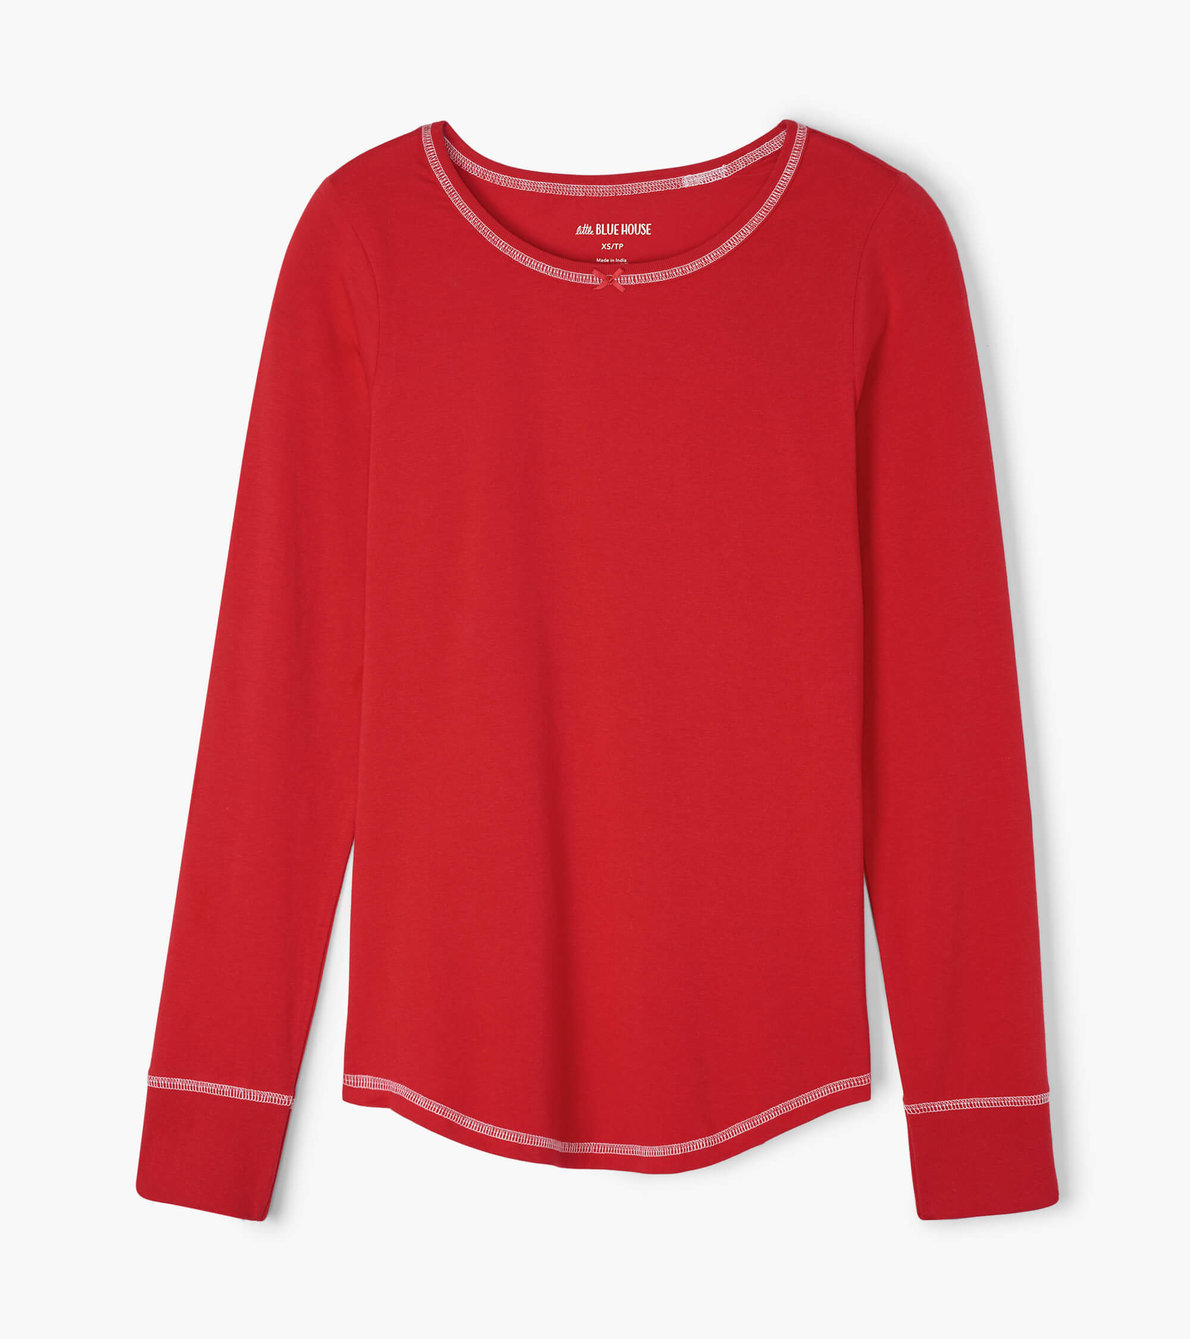 View larger image of Women's Red Long Sleeve Pajama Top